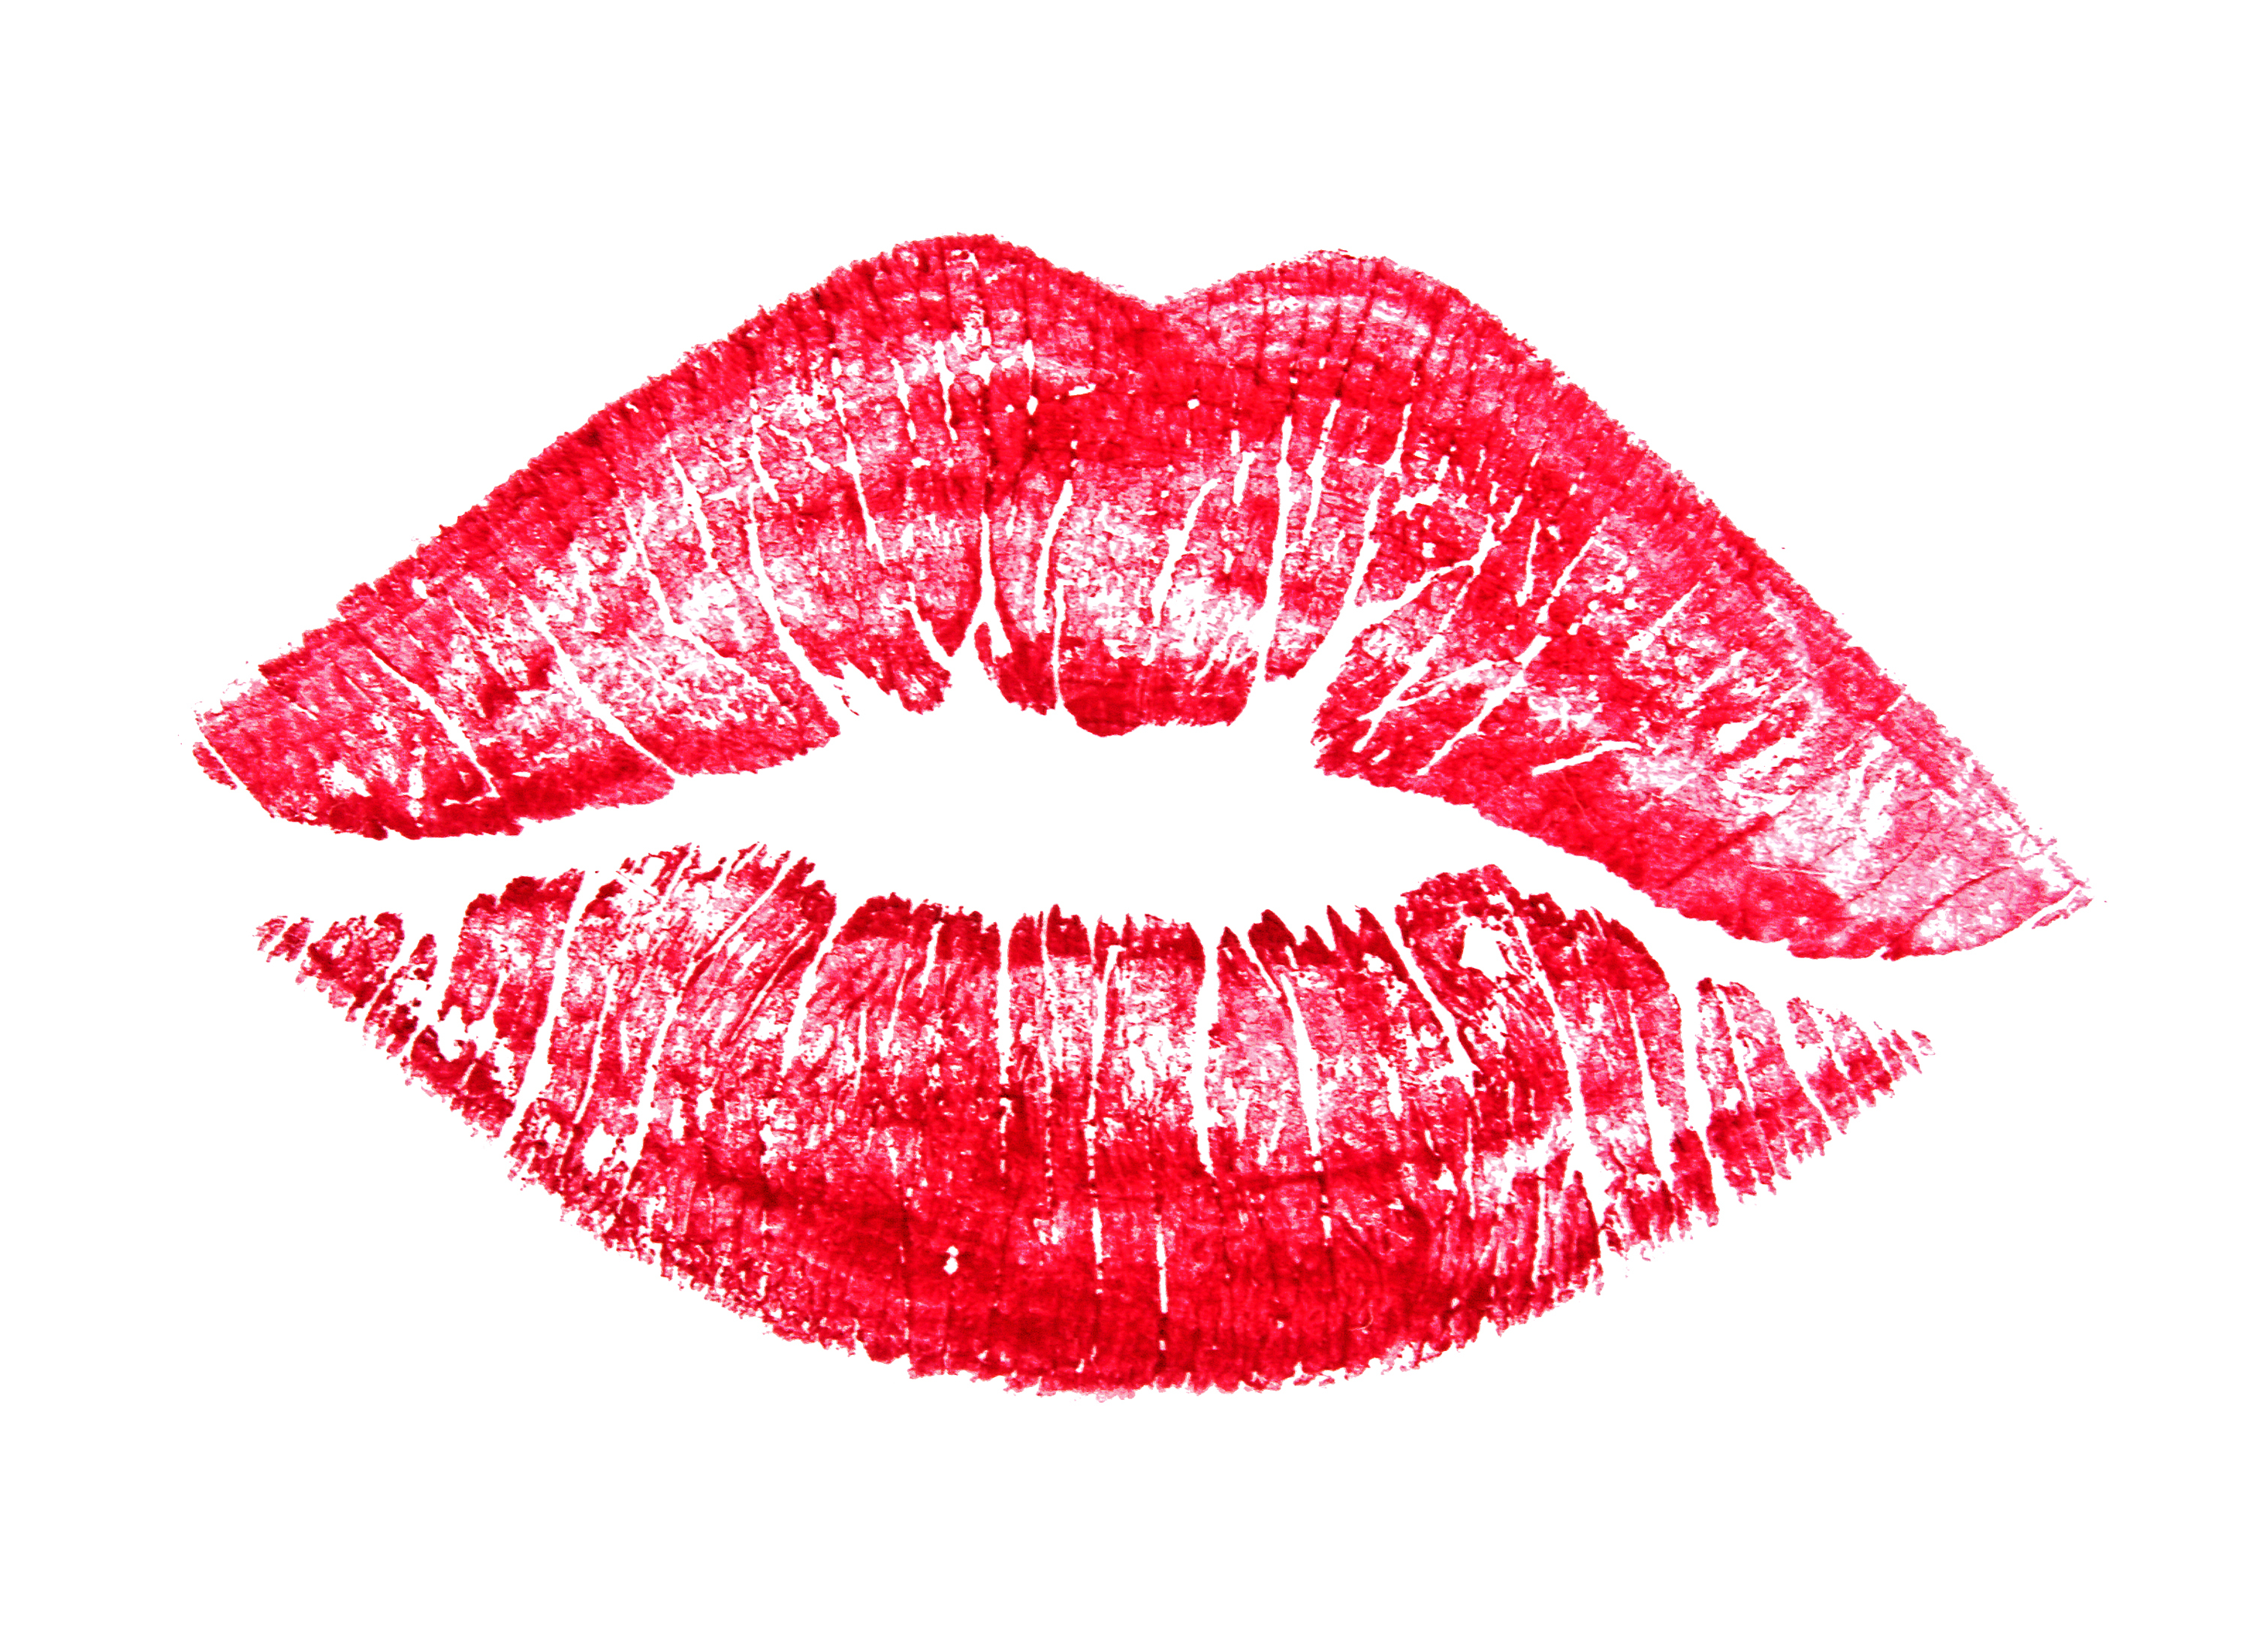 Lips Kiss Clipart Black And W